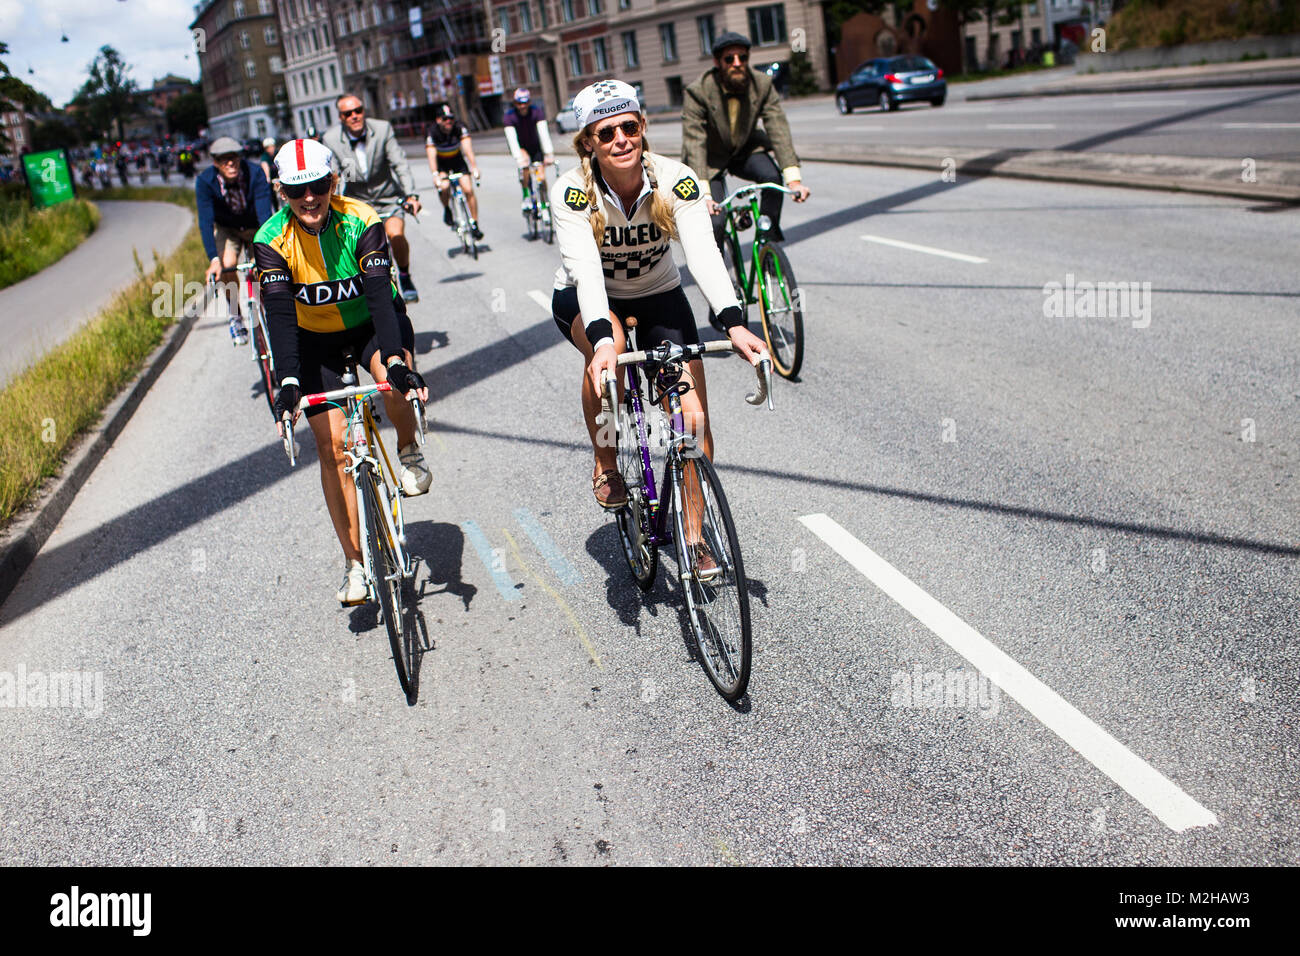 Two cyclers in classical bike tricots lead the vintage bike event Copenhagen Classico 2014. Denmark, 22/06 2014. Stock Photo